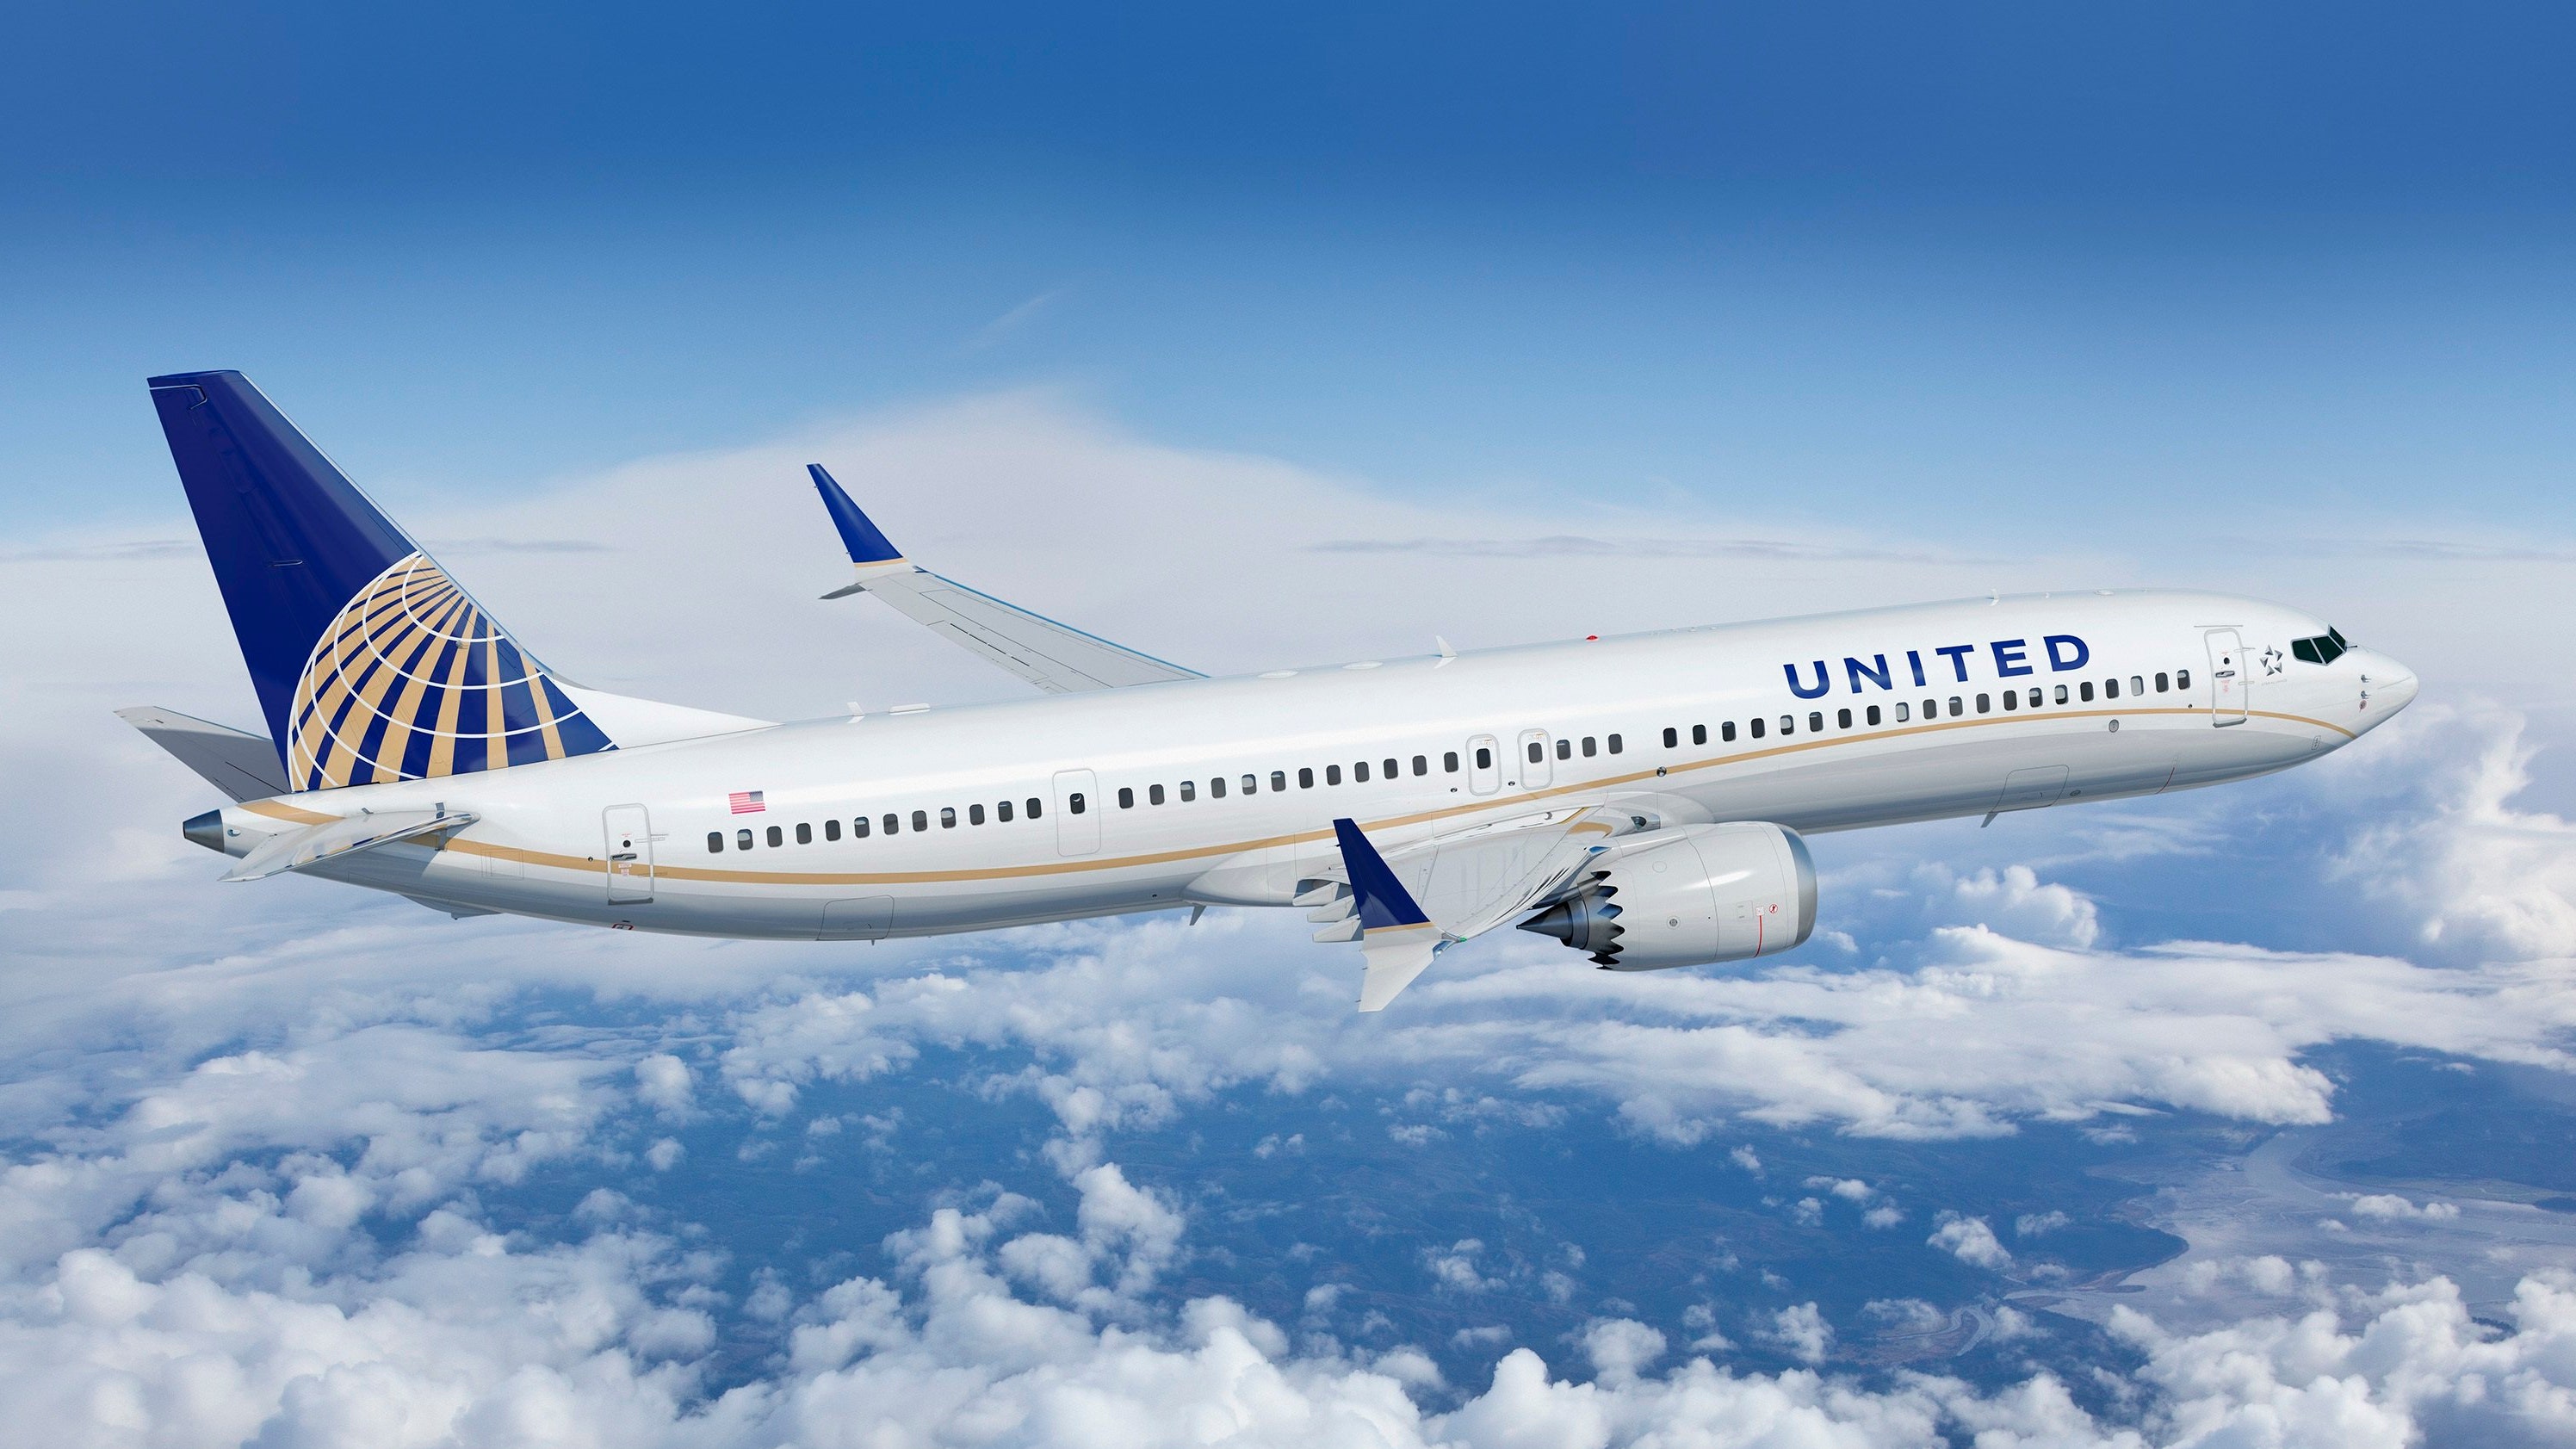 Massive - United Airlines is purchasing 200 new B737 Max aircrafts and 70 Airbus A321Neo jets !